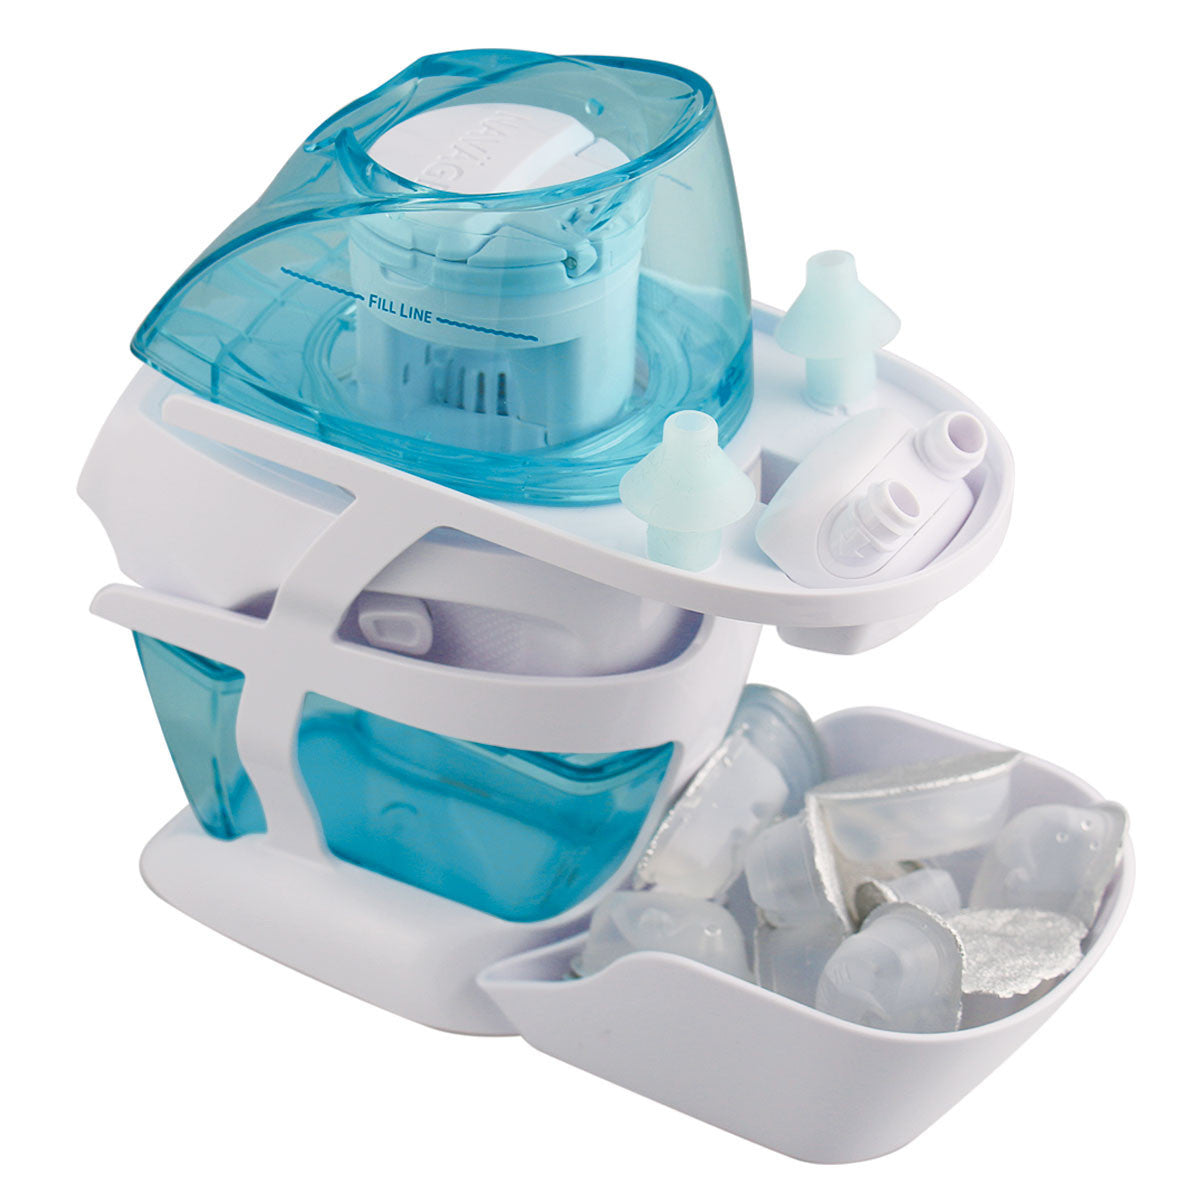 Navage Nasal Care Deluxe Bundle: Navage Nose Cleaner with 20 SaltPods,  Countertop Caddy, and Travel Bag. 142.85 if Purchased Separately. Save  22.90.